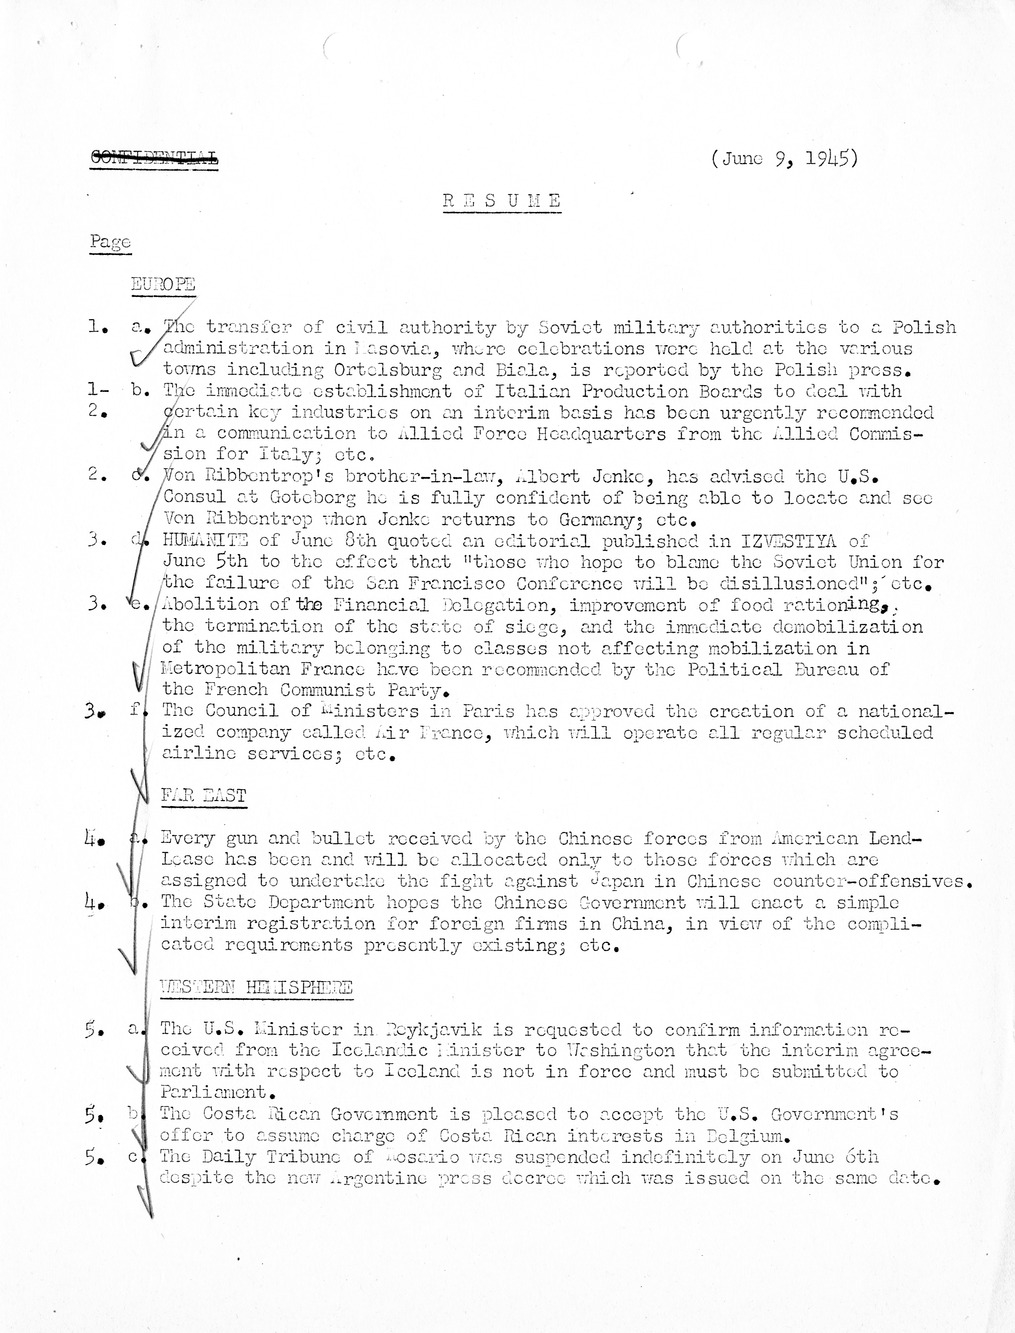 Brief of Telegrams of the Department of State Prepared by Division of Naval Intelligence